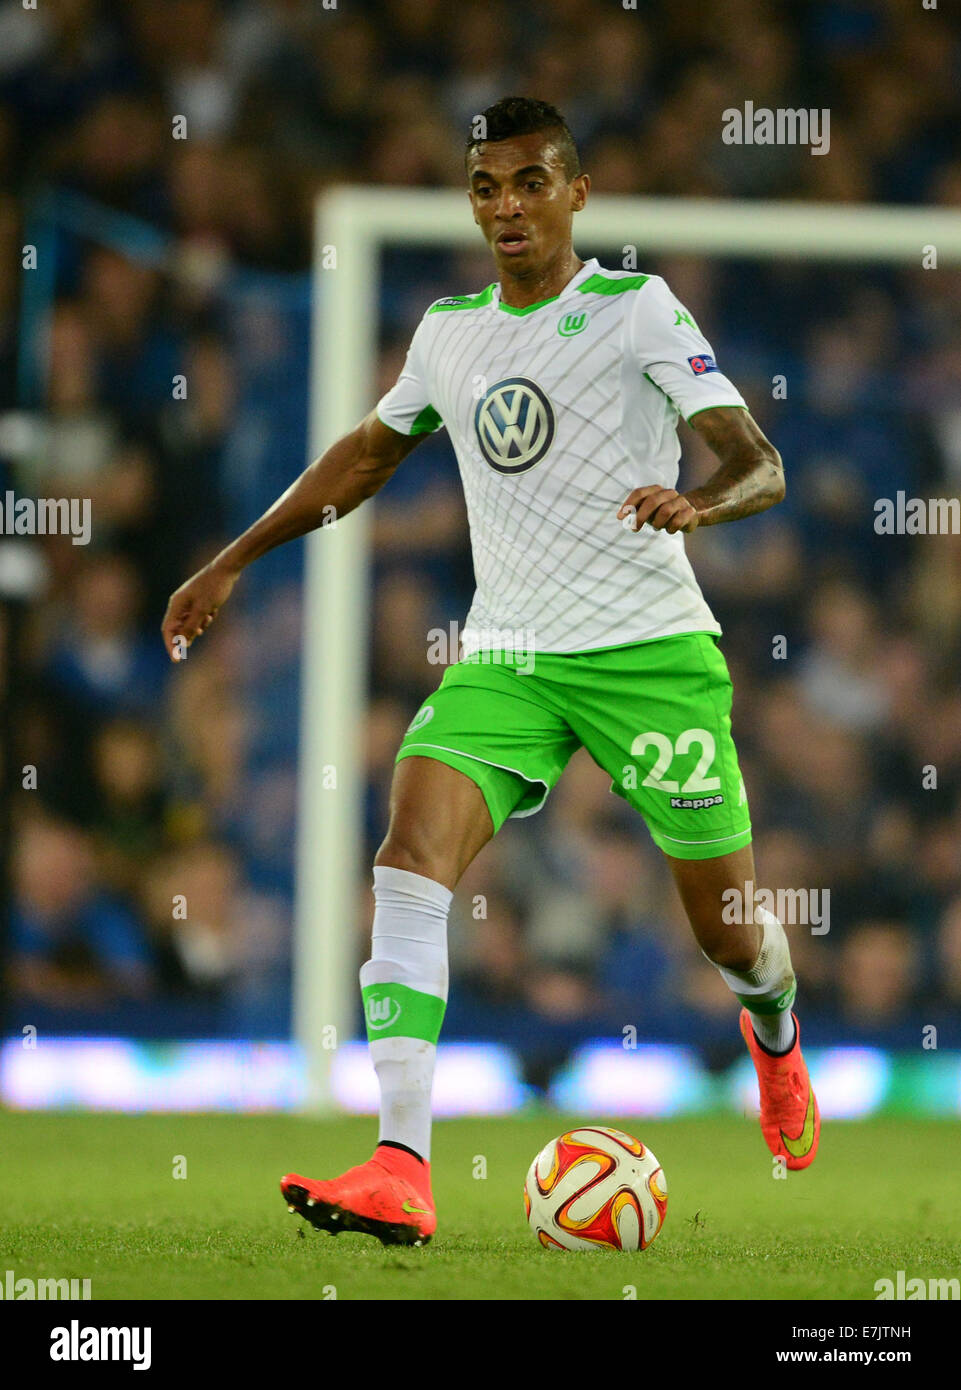 Liverpool, UK. 18th Sep, 2014. Wolfsburg's Luiz Gustavo in action during the UEFA Europa League group H soccer match between Everton FC and VfL Wolfsburg at the Goodison Park, Liverpool, Britain, 18 September 2014. © dpa picture alliance/Alamy Live News Stock Photo